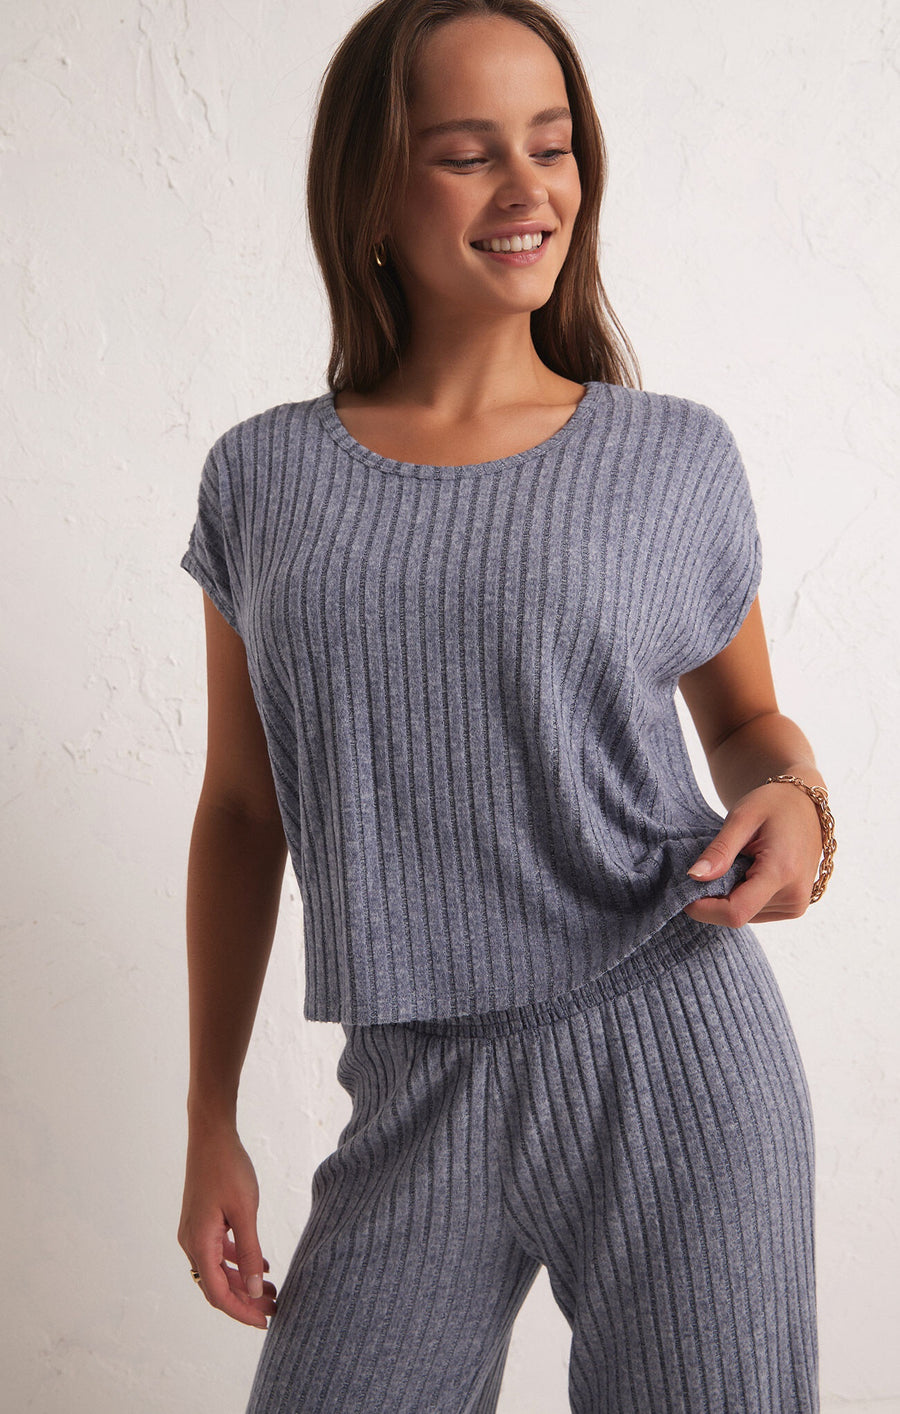 Featuring a ribbed relaxed short sleeve top in the color dusty navy 